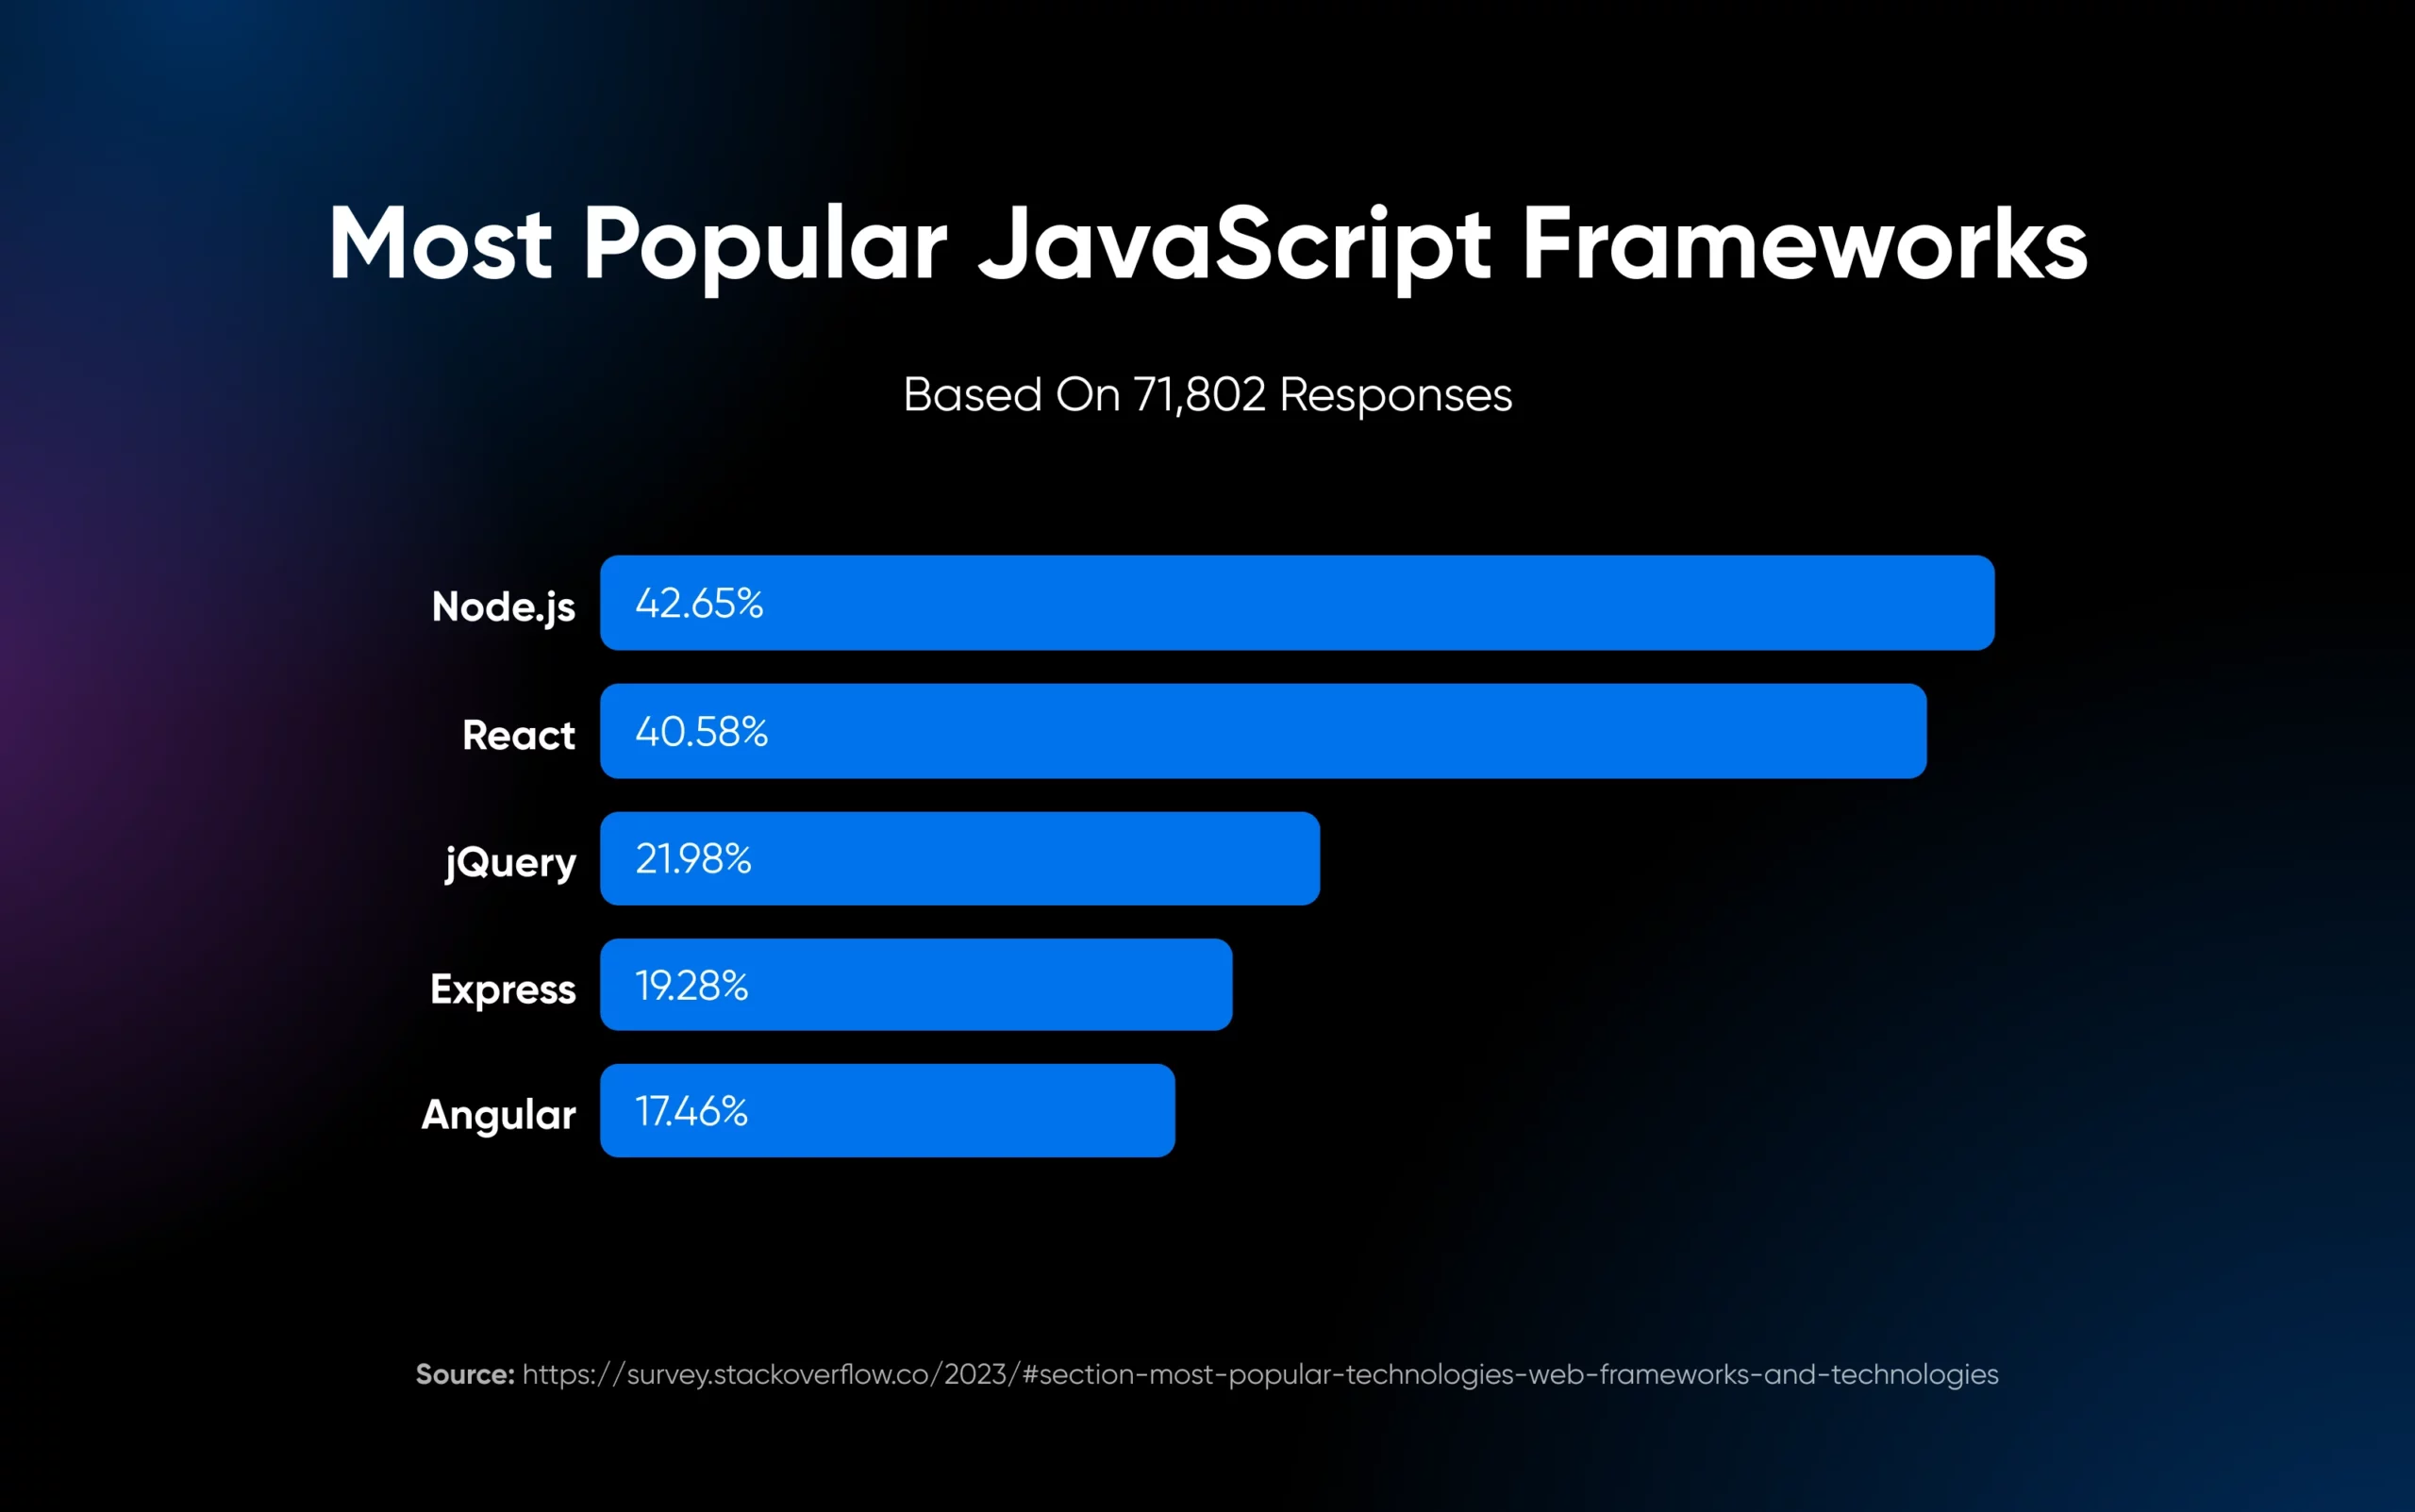 Most popular JavaScript frameworks, in order from high to low, include Node.js, React, jQuery, Express, and Angular.